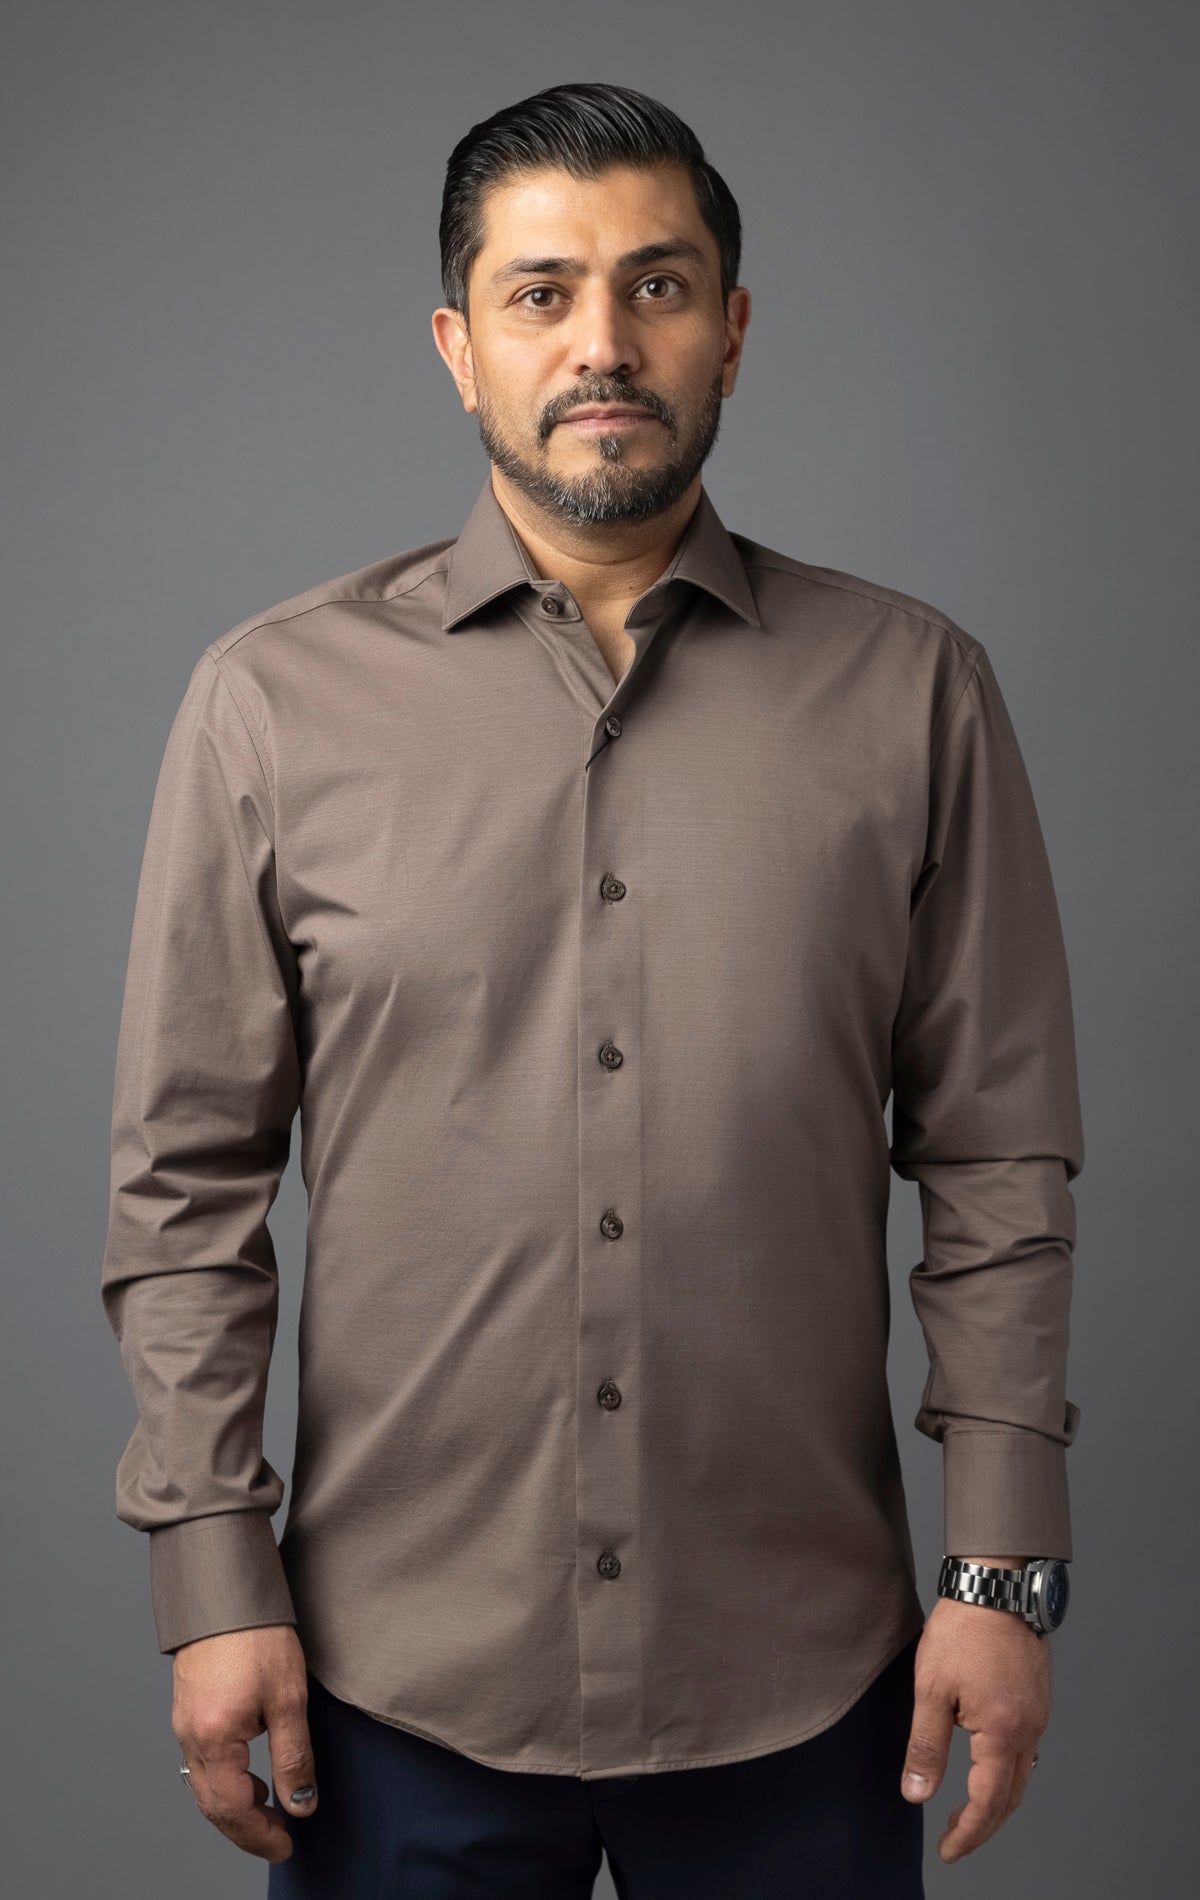 Men's formal brown button-up shirt with long sleeves.